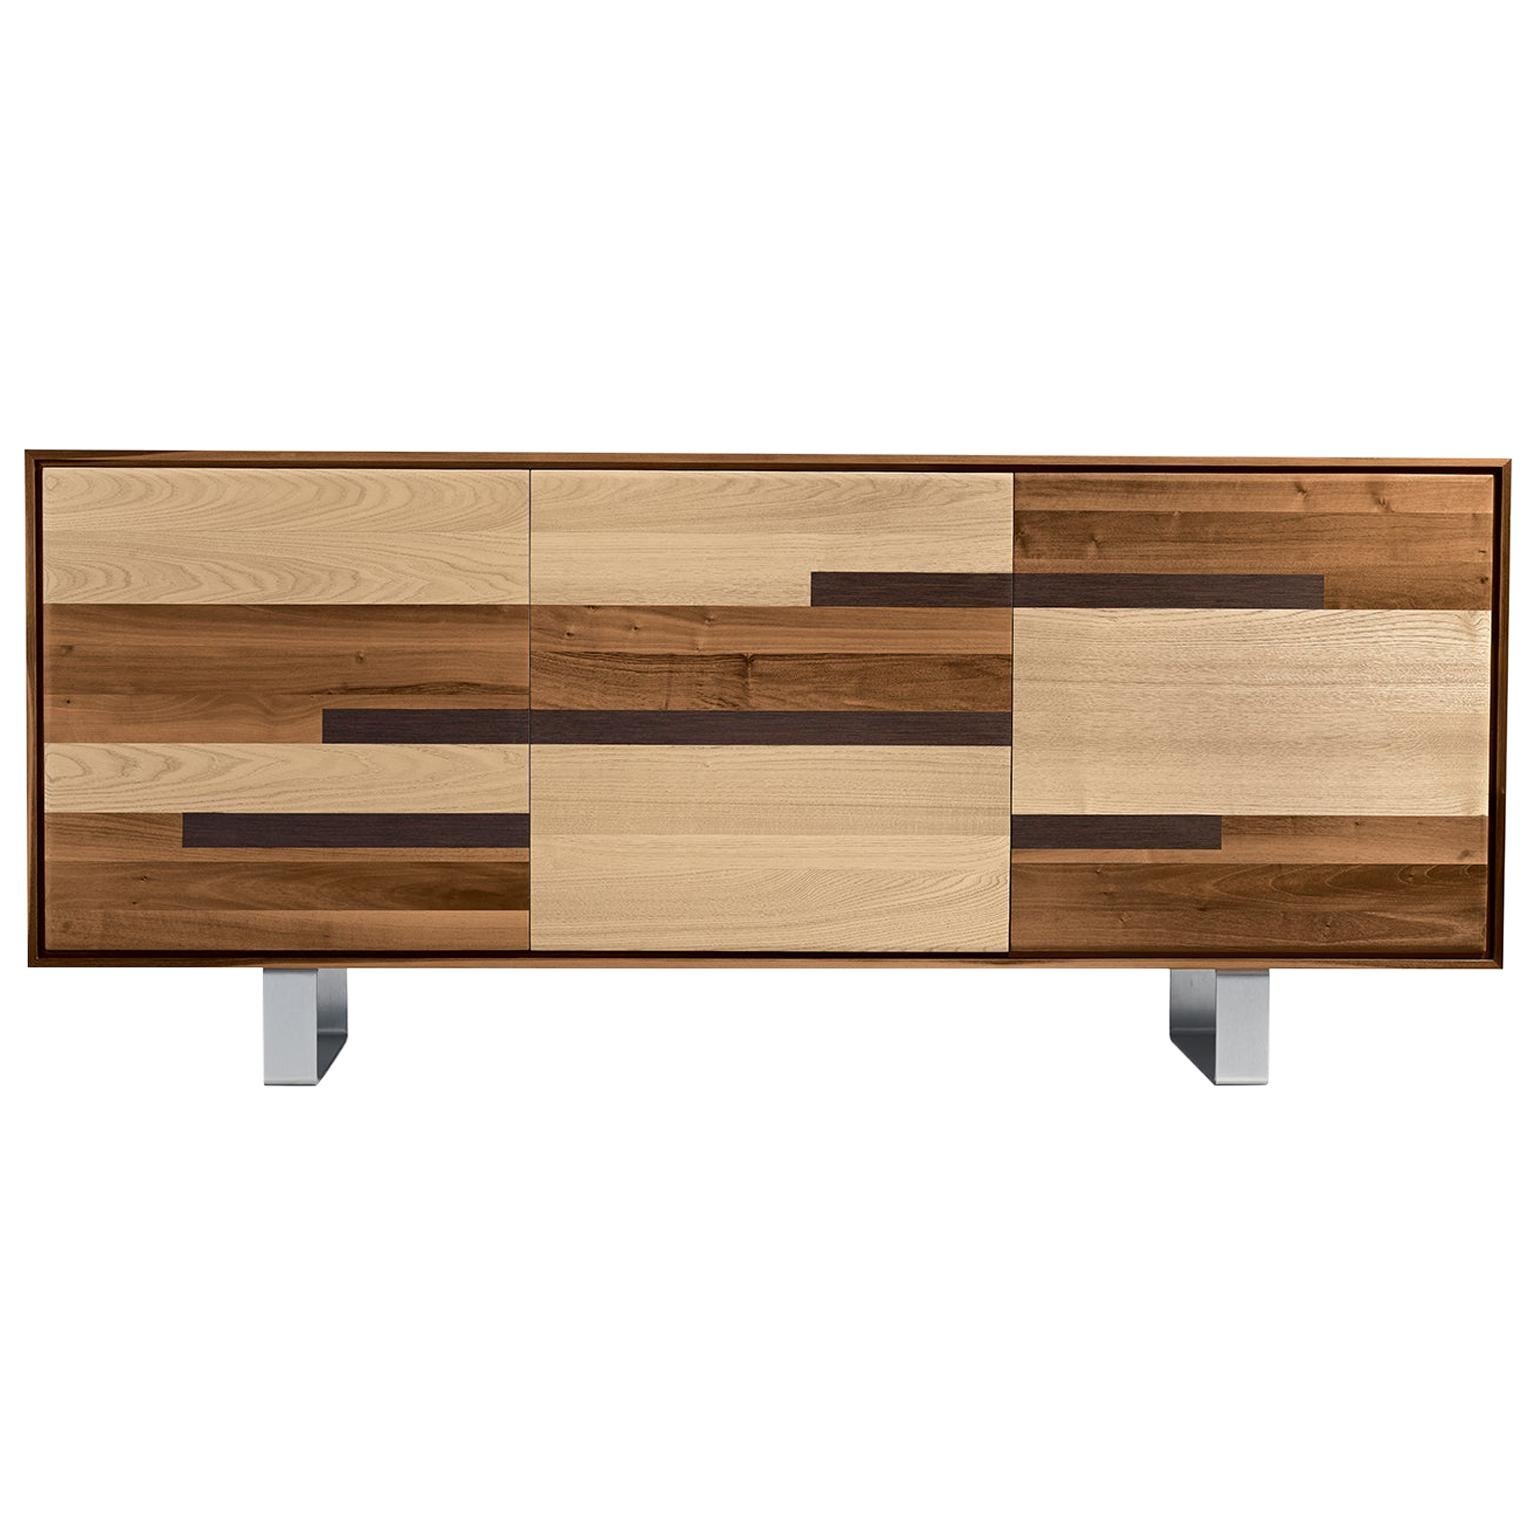 Materia Natura Solid Wood Sideboard, Walnut in Natural Finish, Contemporary For Sale